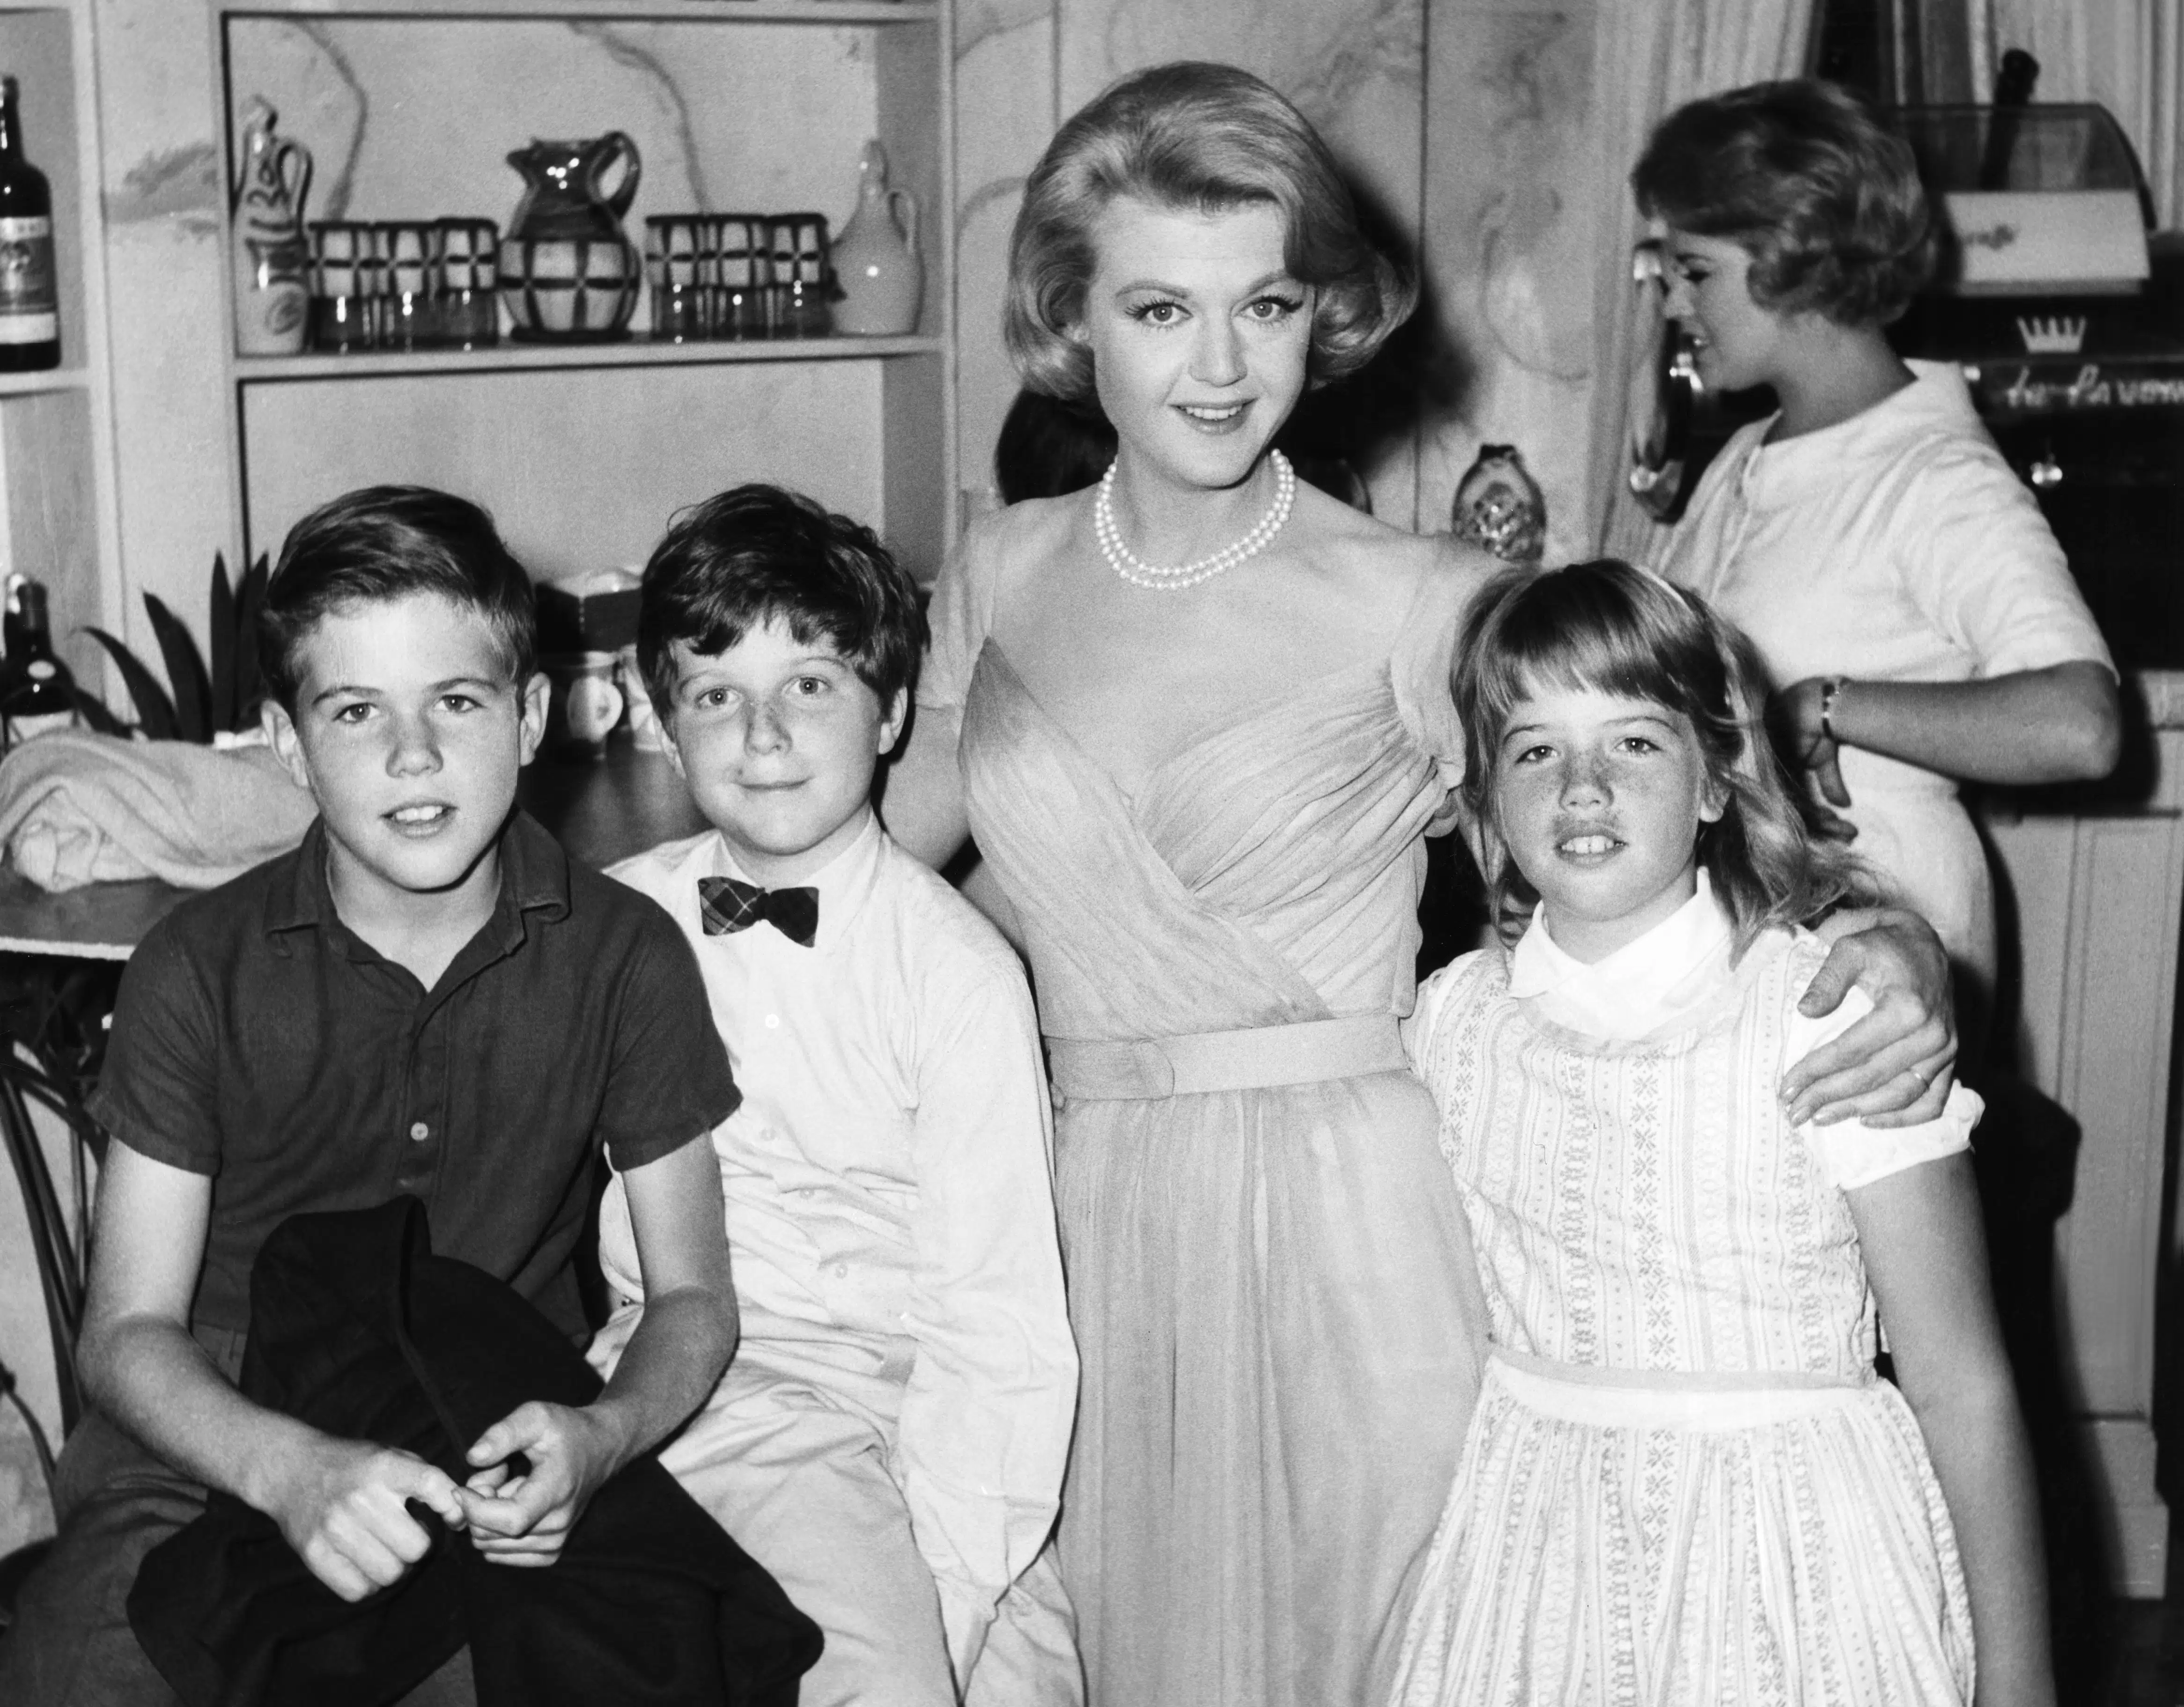 IN THE COOL OF THE DAY, Angela Lansbury (second from right) is visited on set by her children Anthony Pullen Shaw (bow tie) and Deirdre Angela Shaw (right), 1963